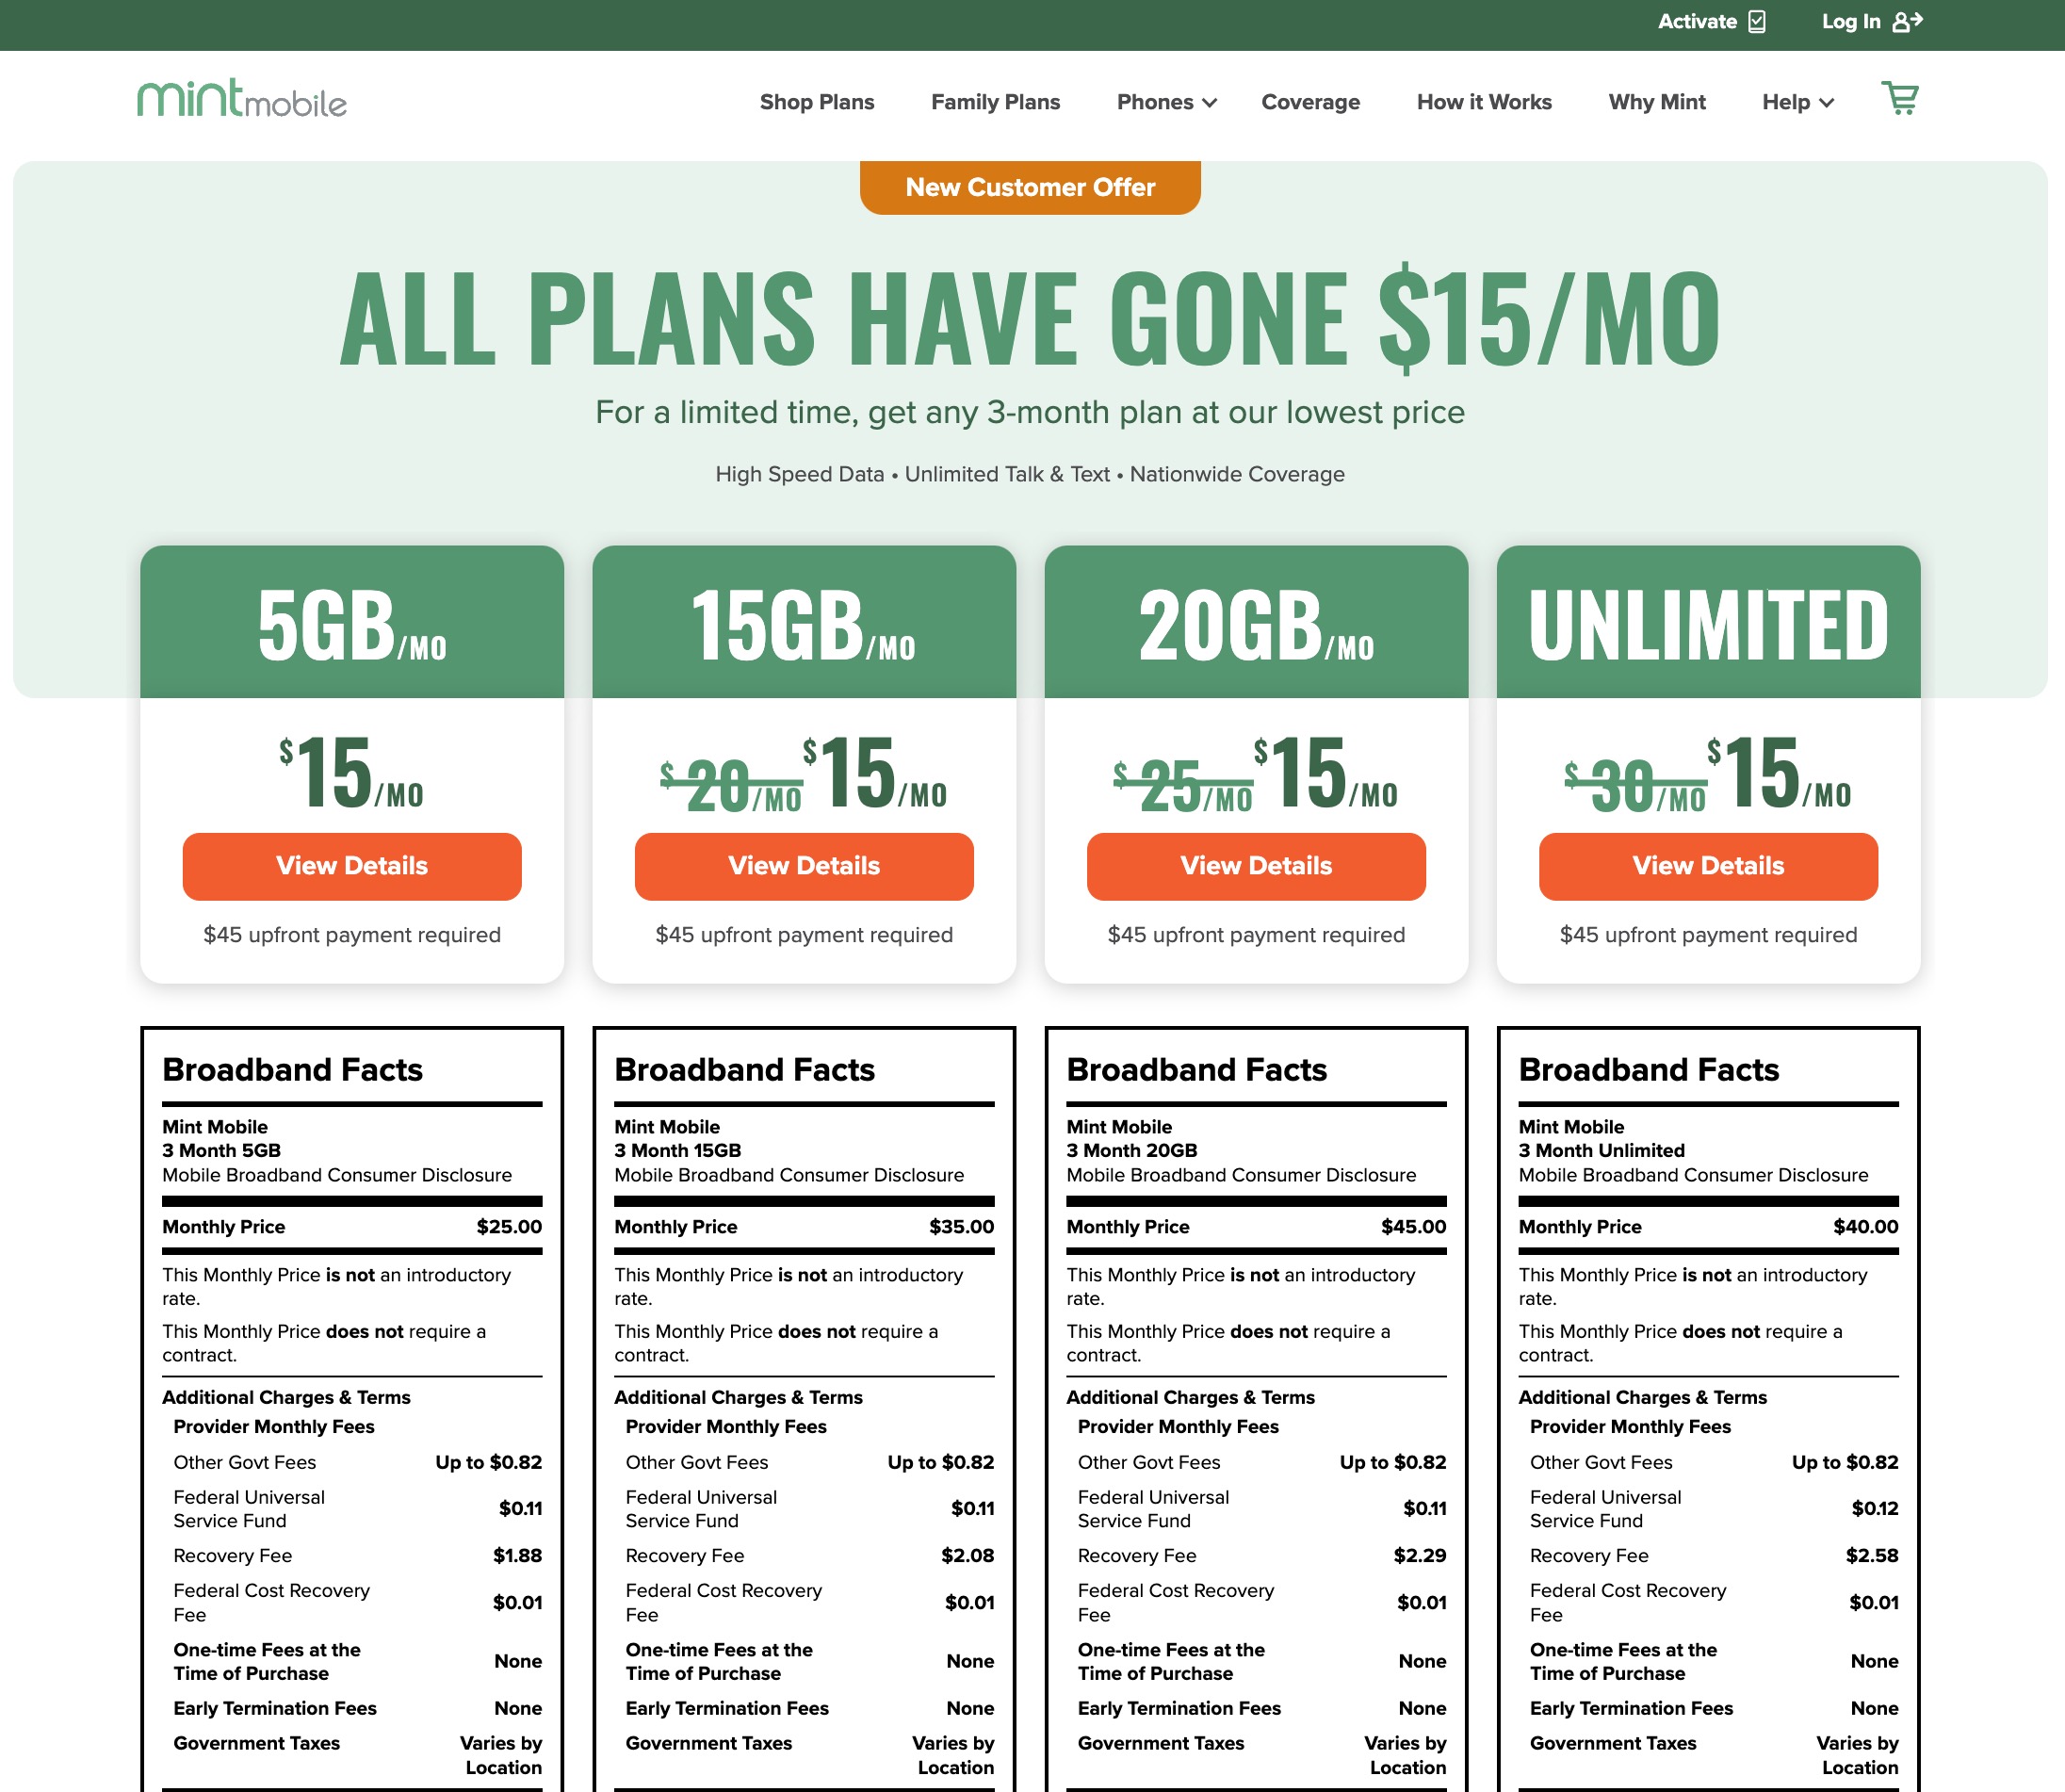 Mint Mobile Broadband Facts